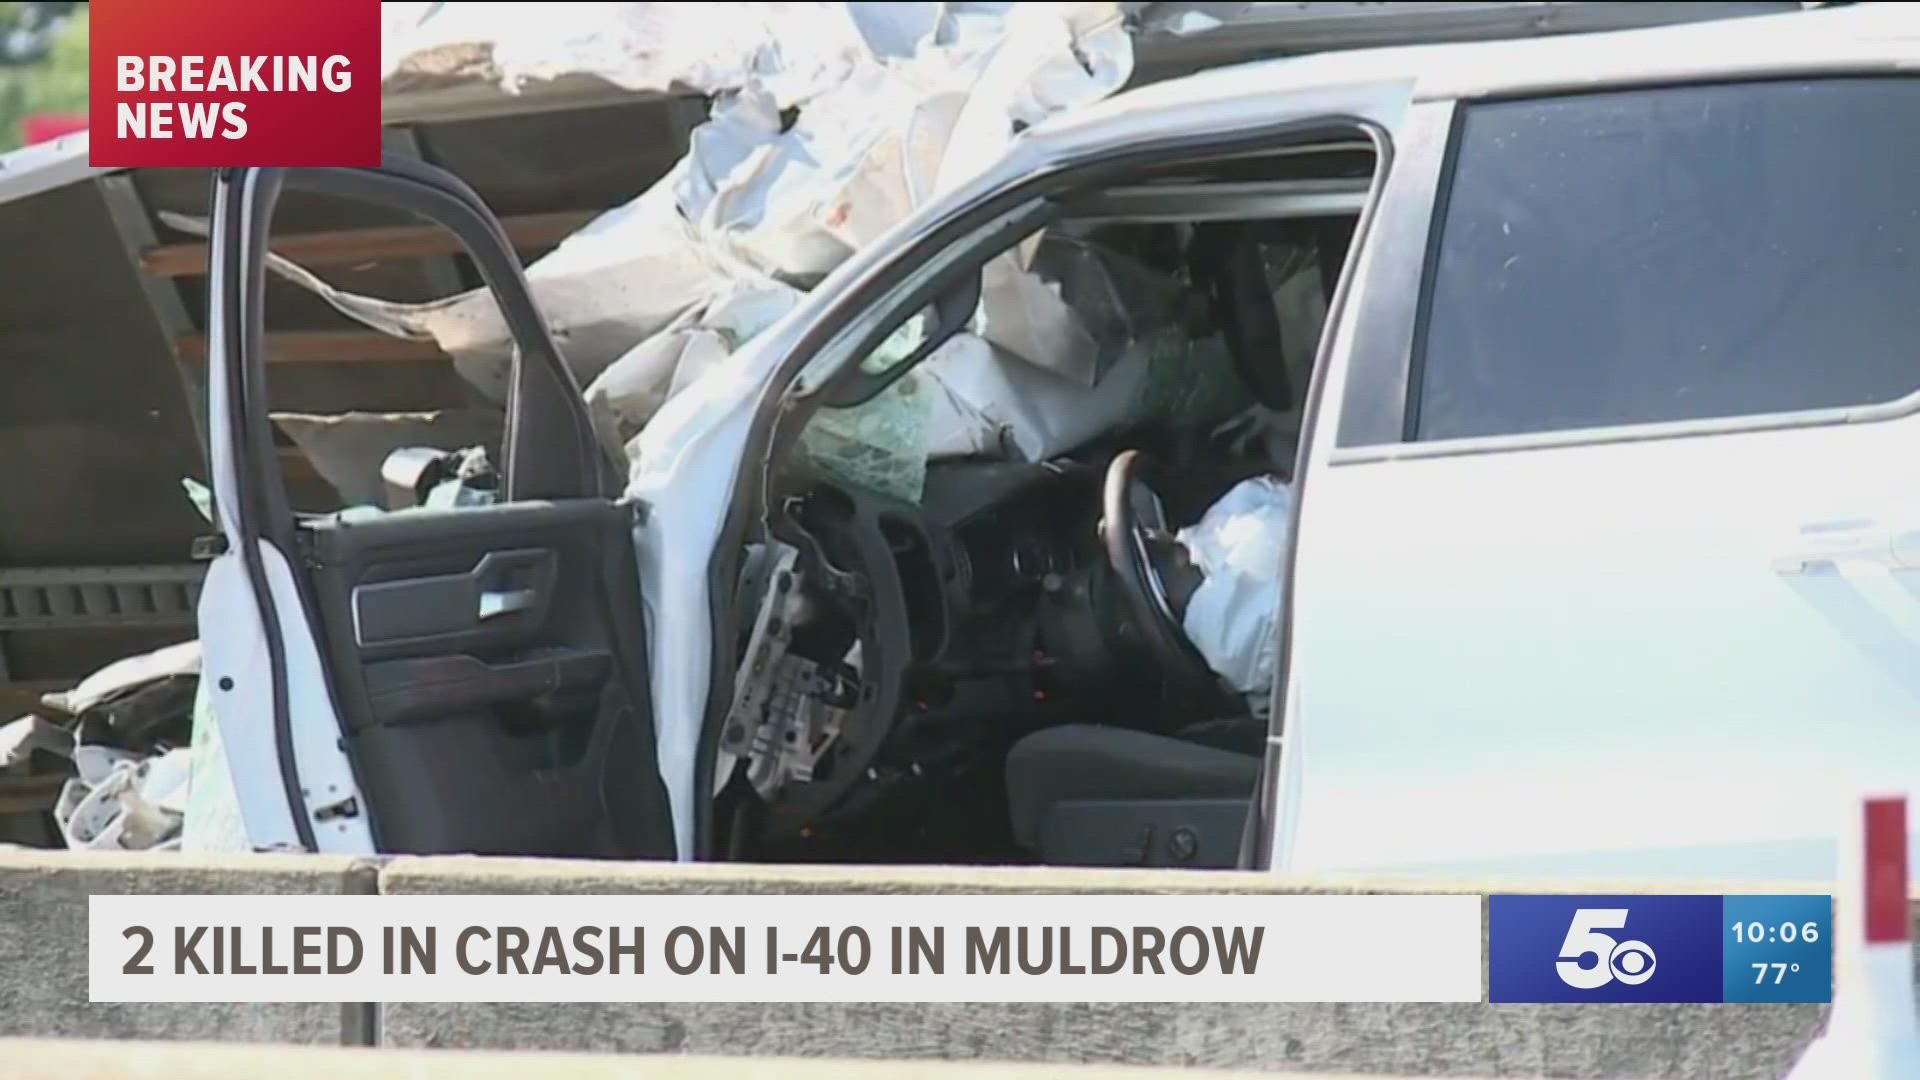 The crash took place on I-40 westbound at mile marker 321.